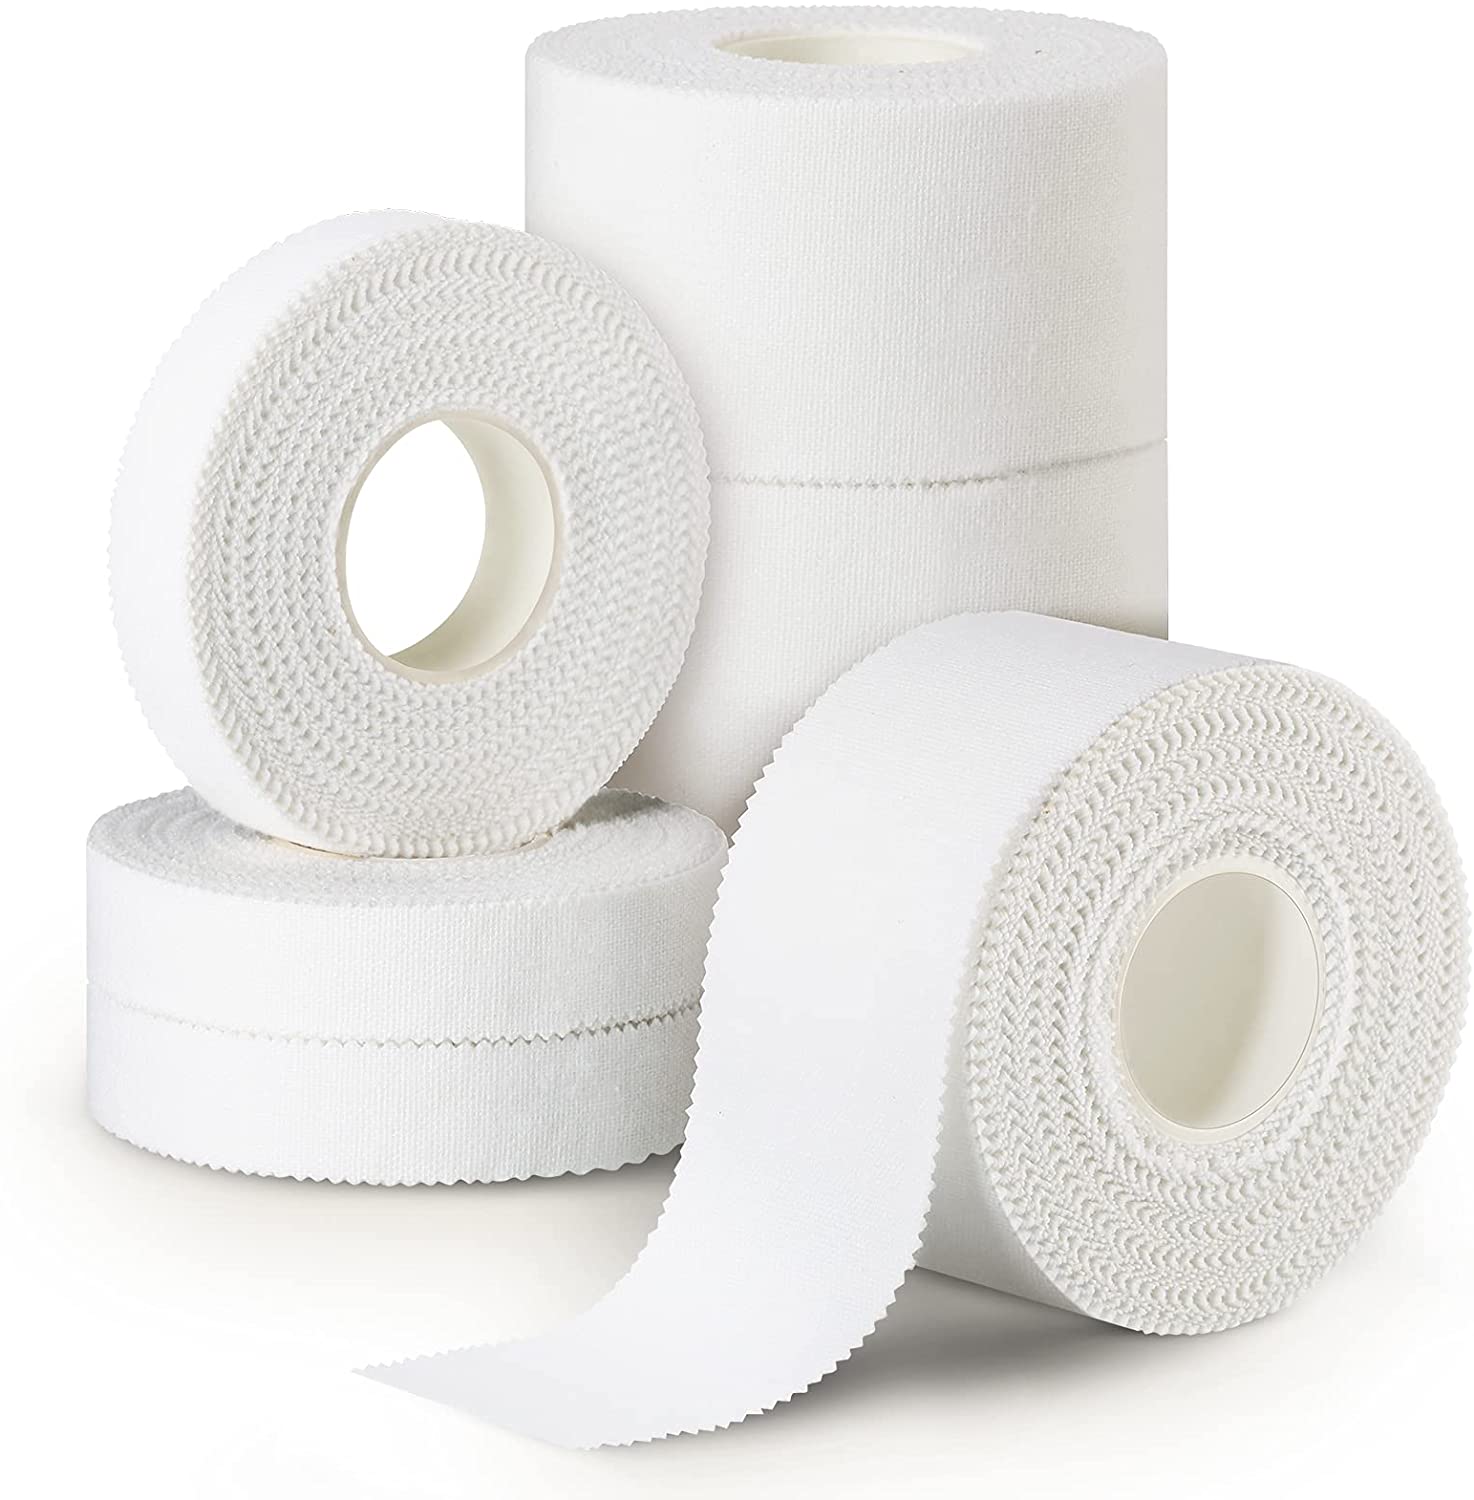 athletic sports tape